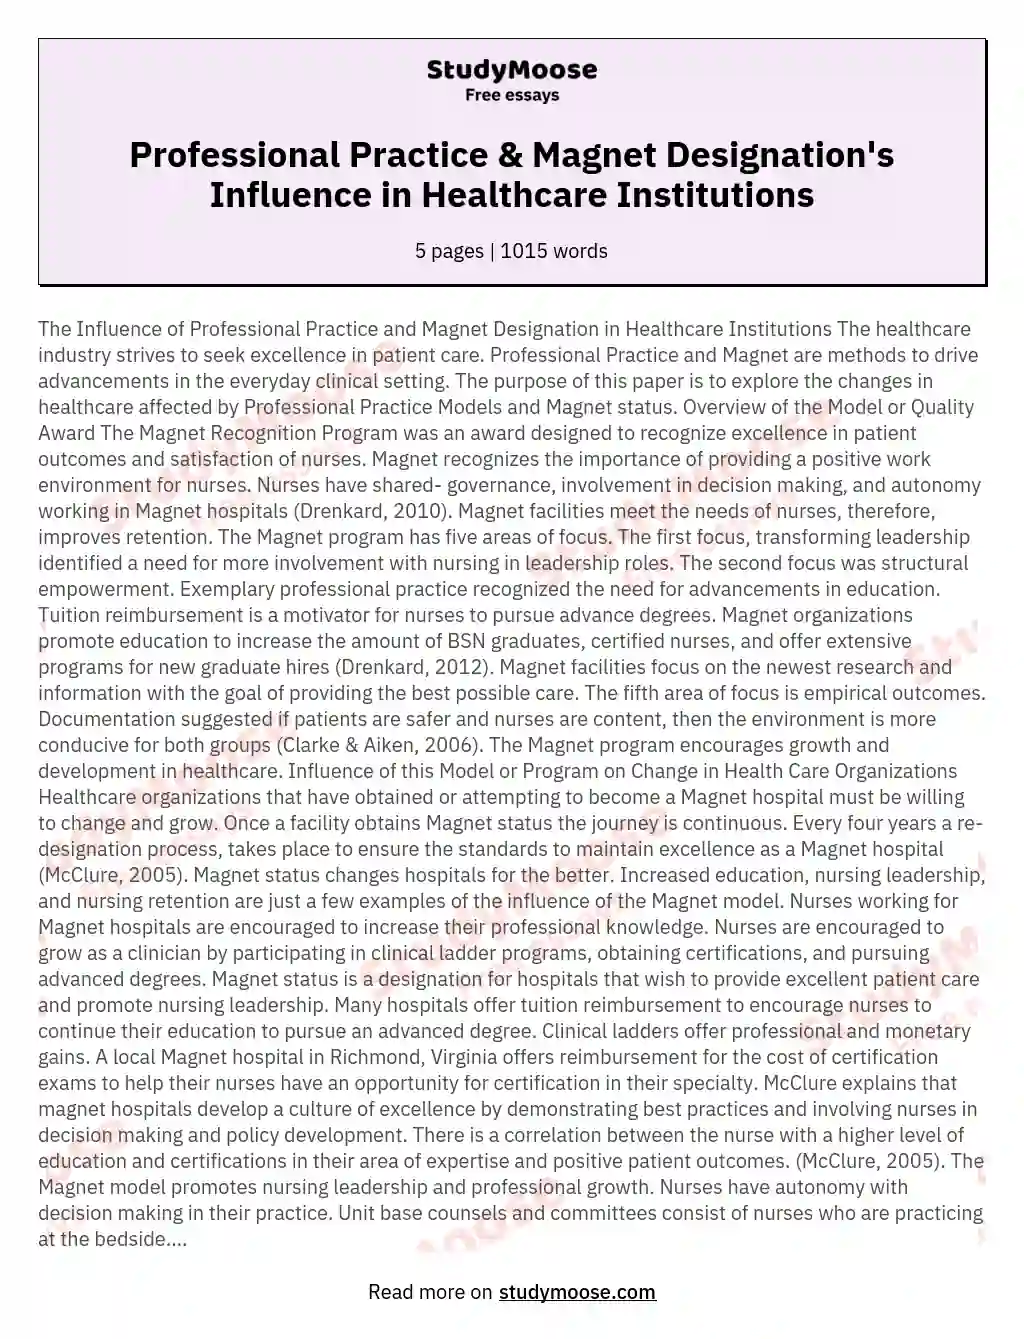 The Influence of Professional Practice and Magnet Designation in Healthcare Institutions